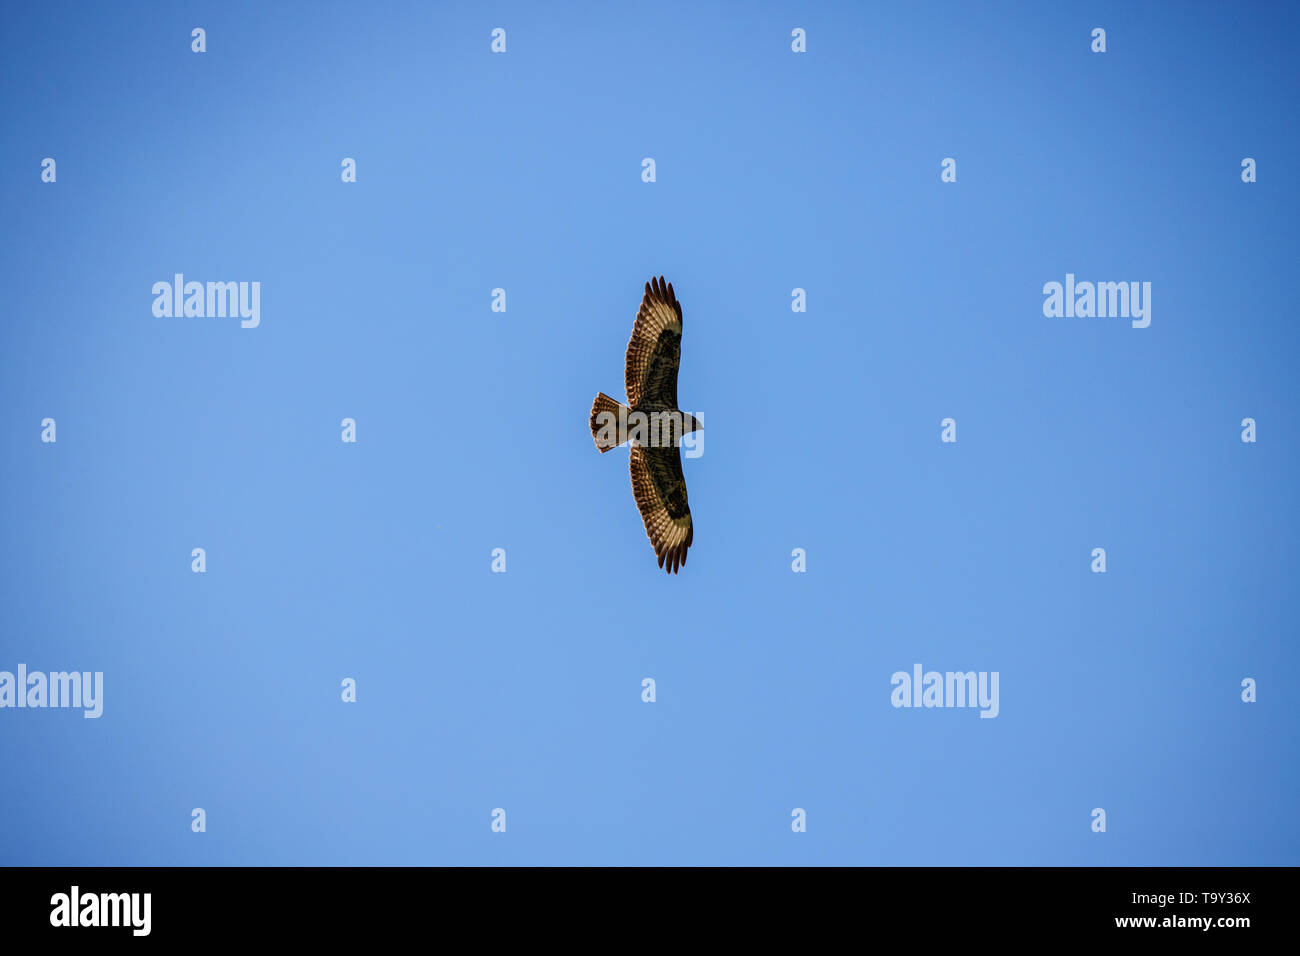 mighty eagle flying high in the beautiful blue cloudy sky showing its silhouette in spring Stock Photo